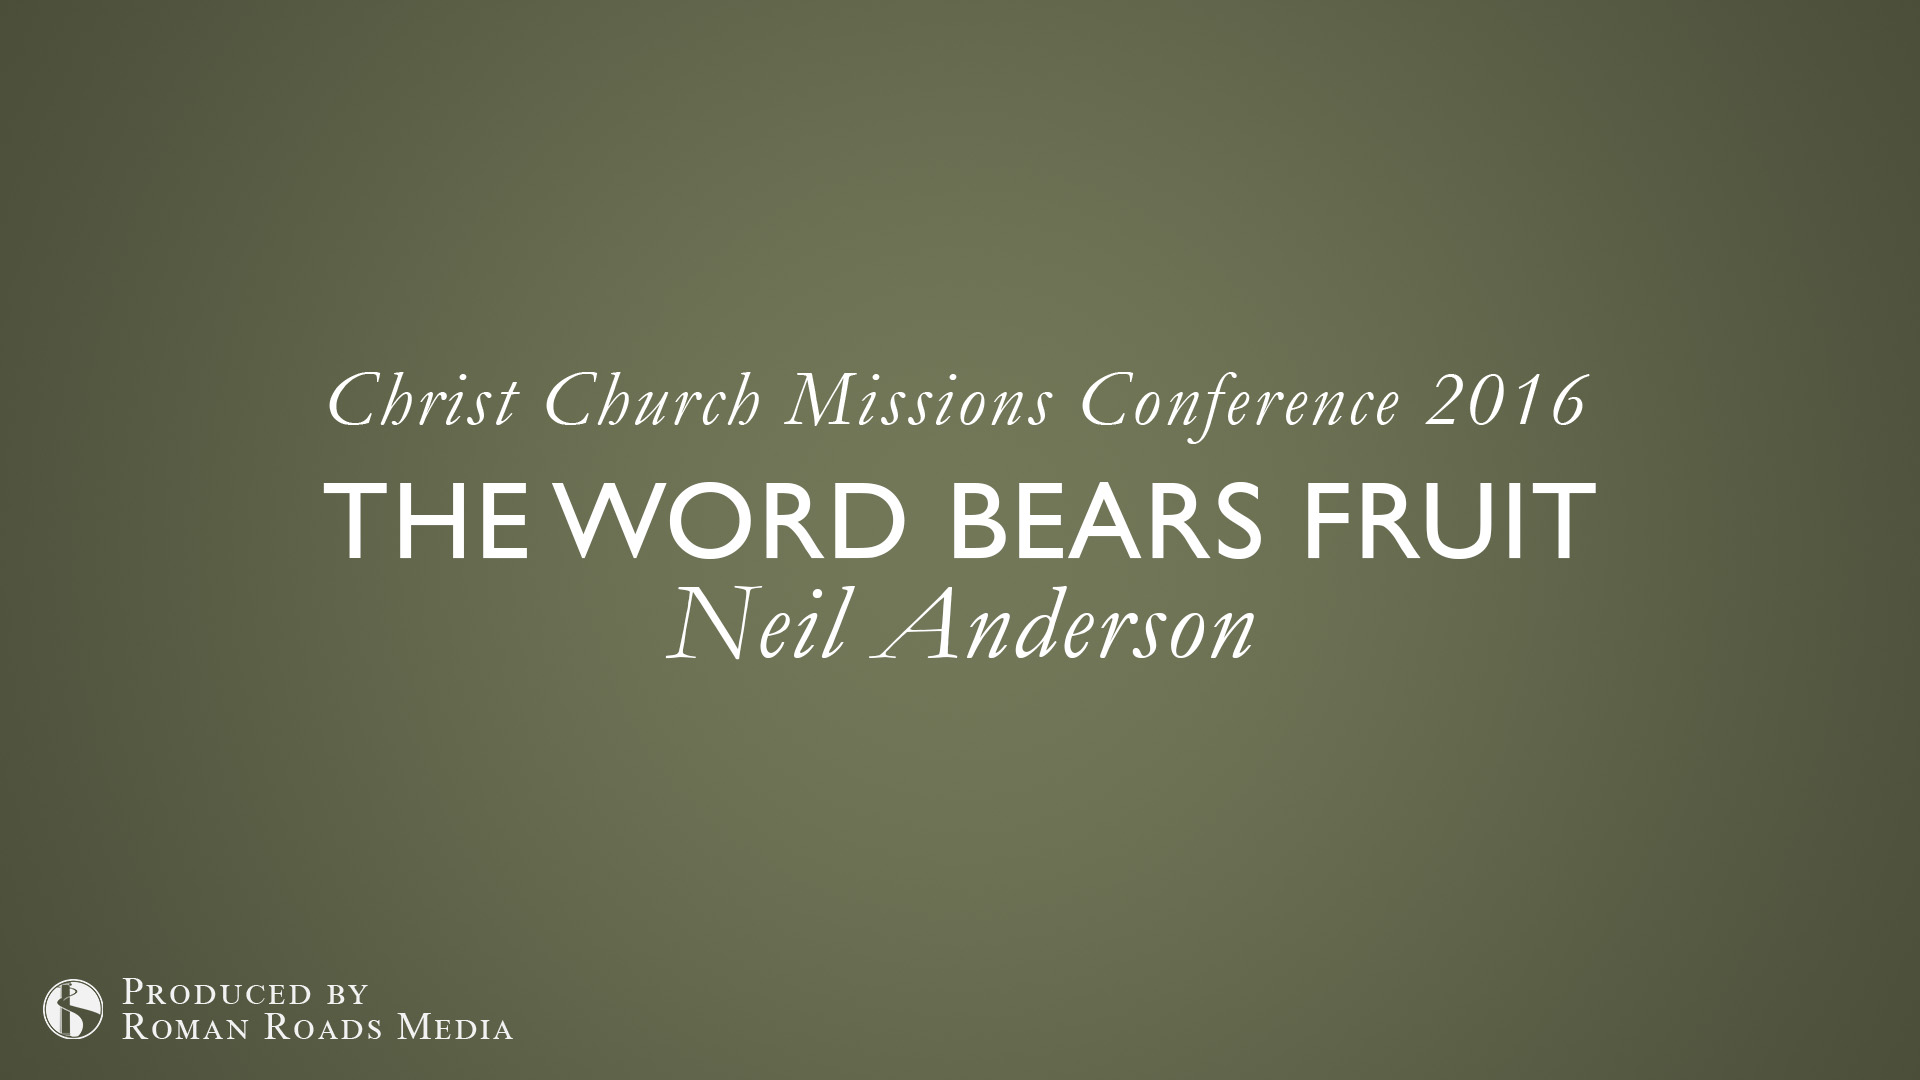 The Word bears fruit – Neil Anderson